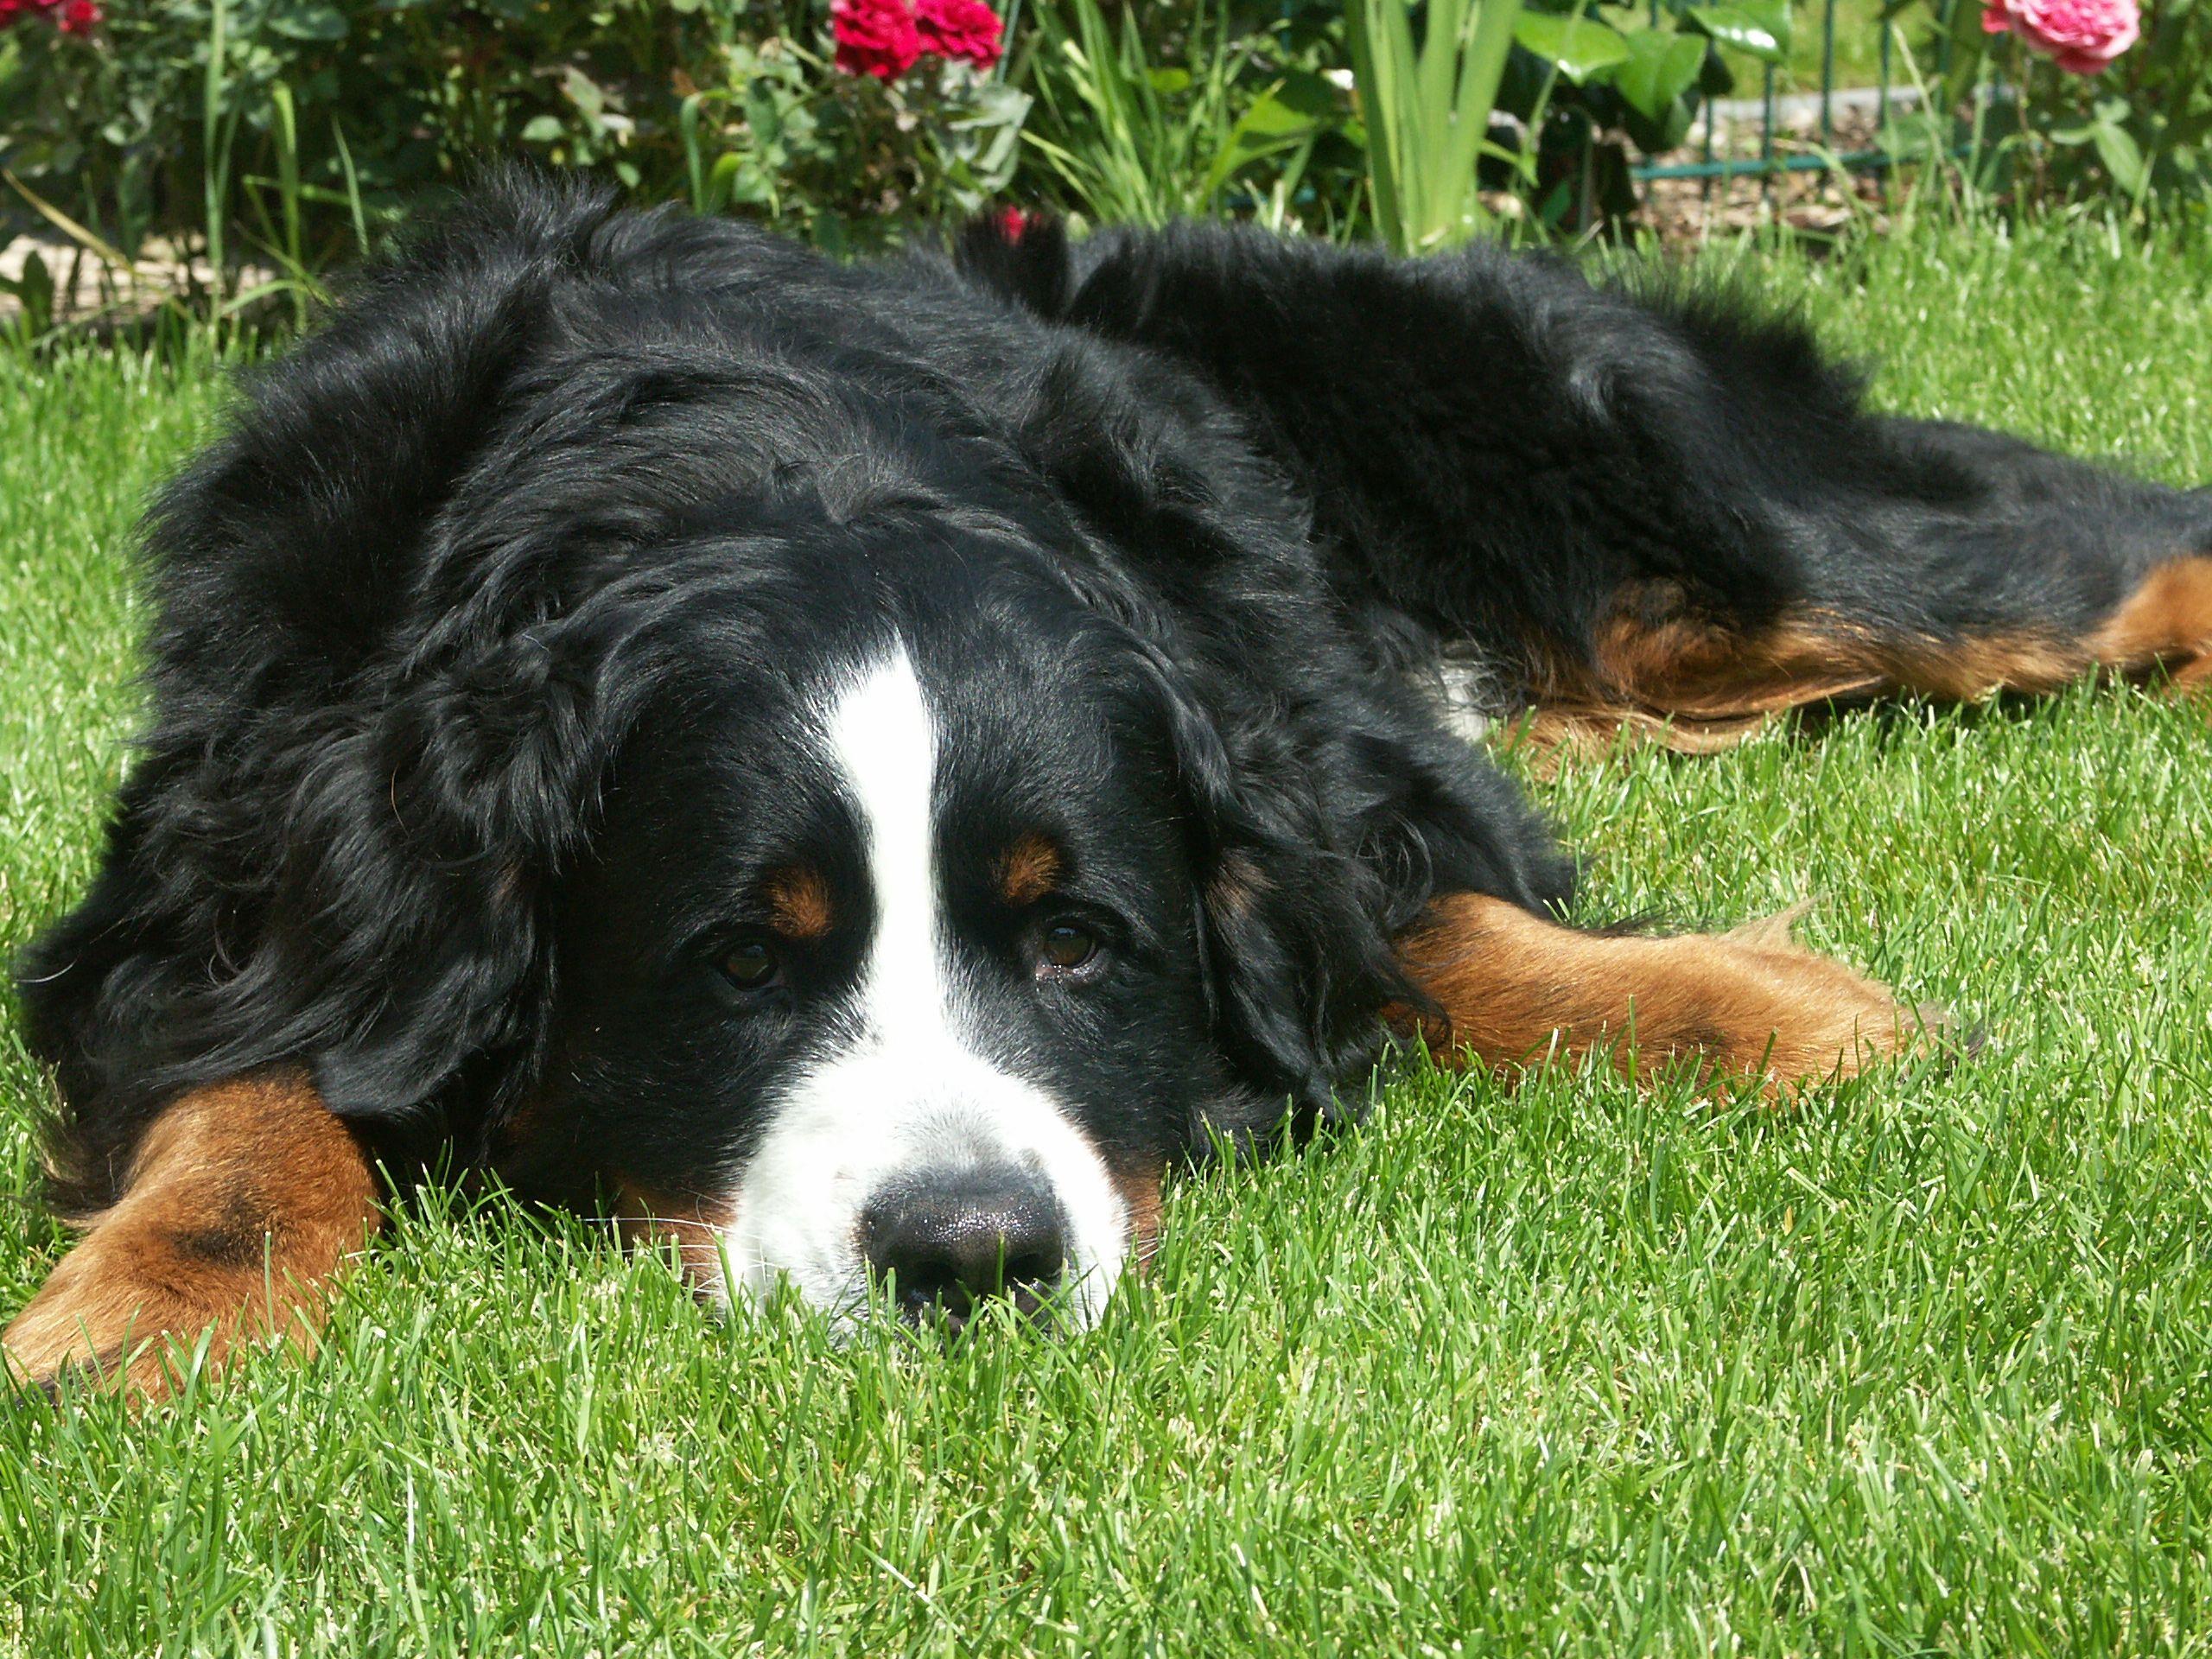 Sad Bernese Mountain Dog on the grass wallpaper and image